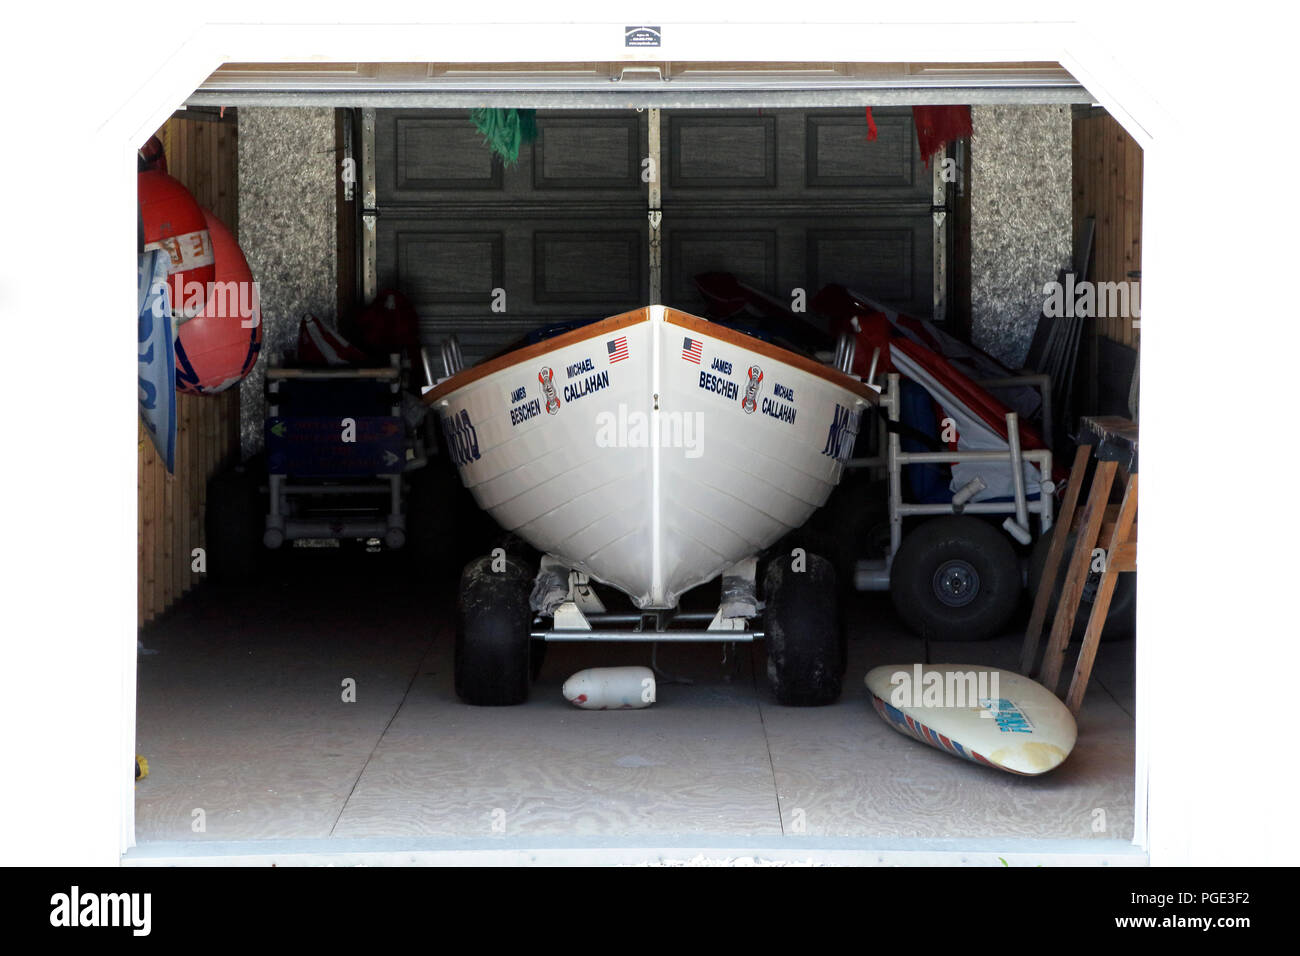 A lifeboat bay with associated life saving tools, North Wildwood, New Jersey, USA Stock Photo